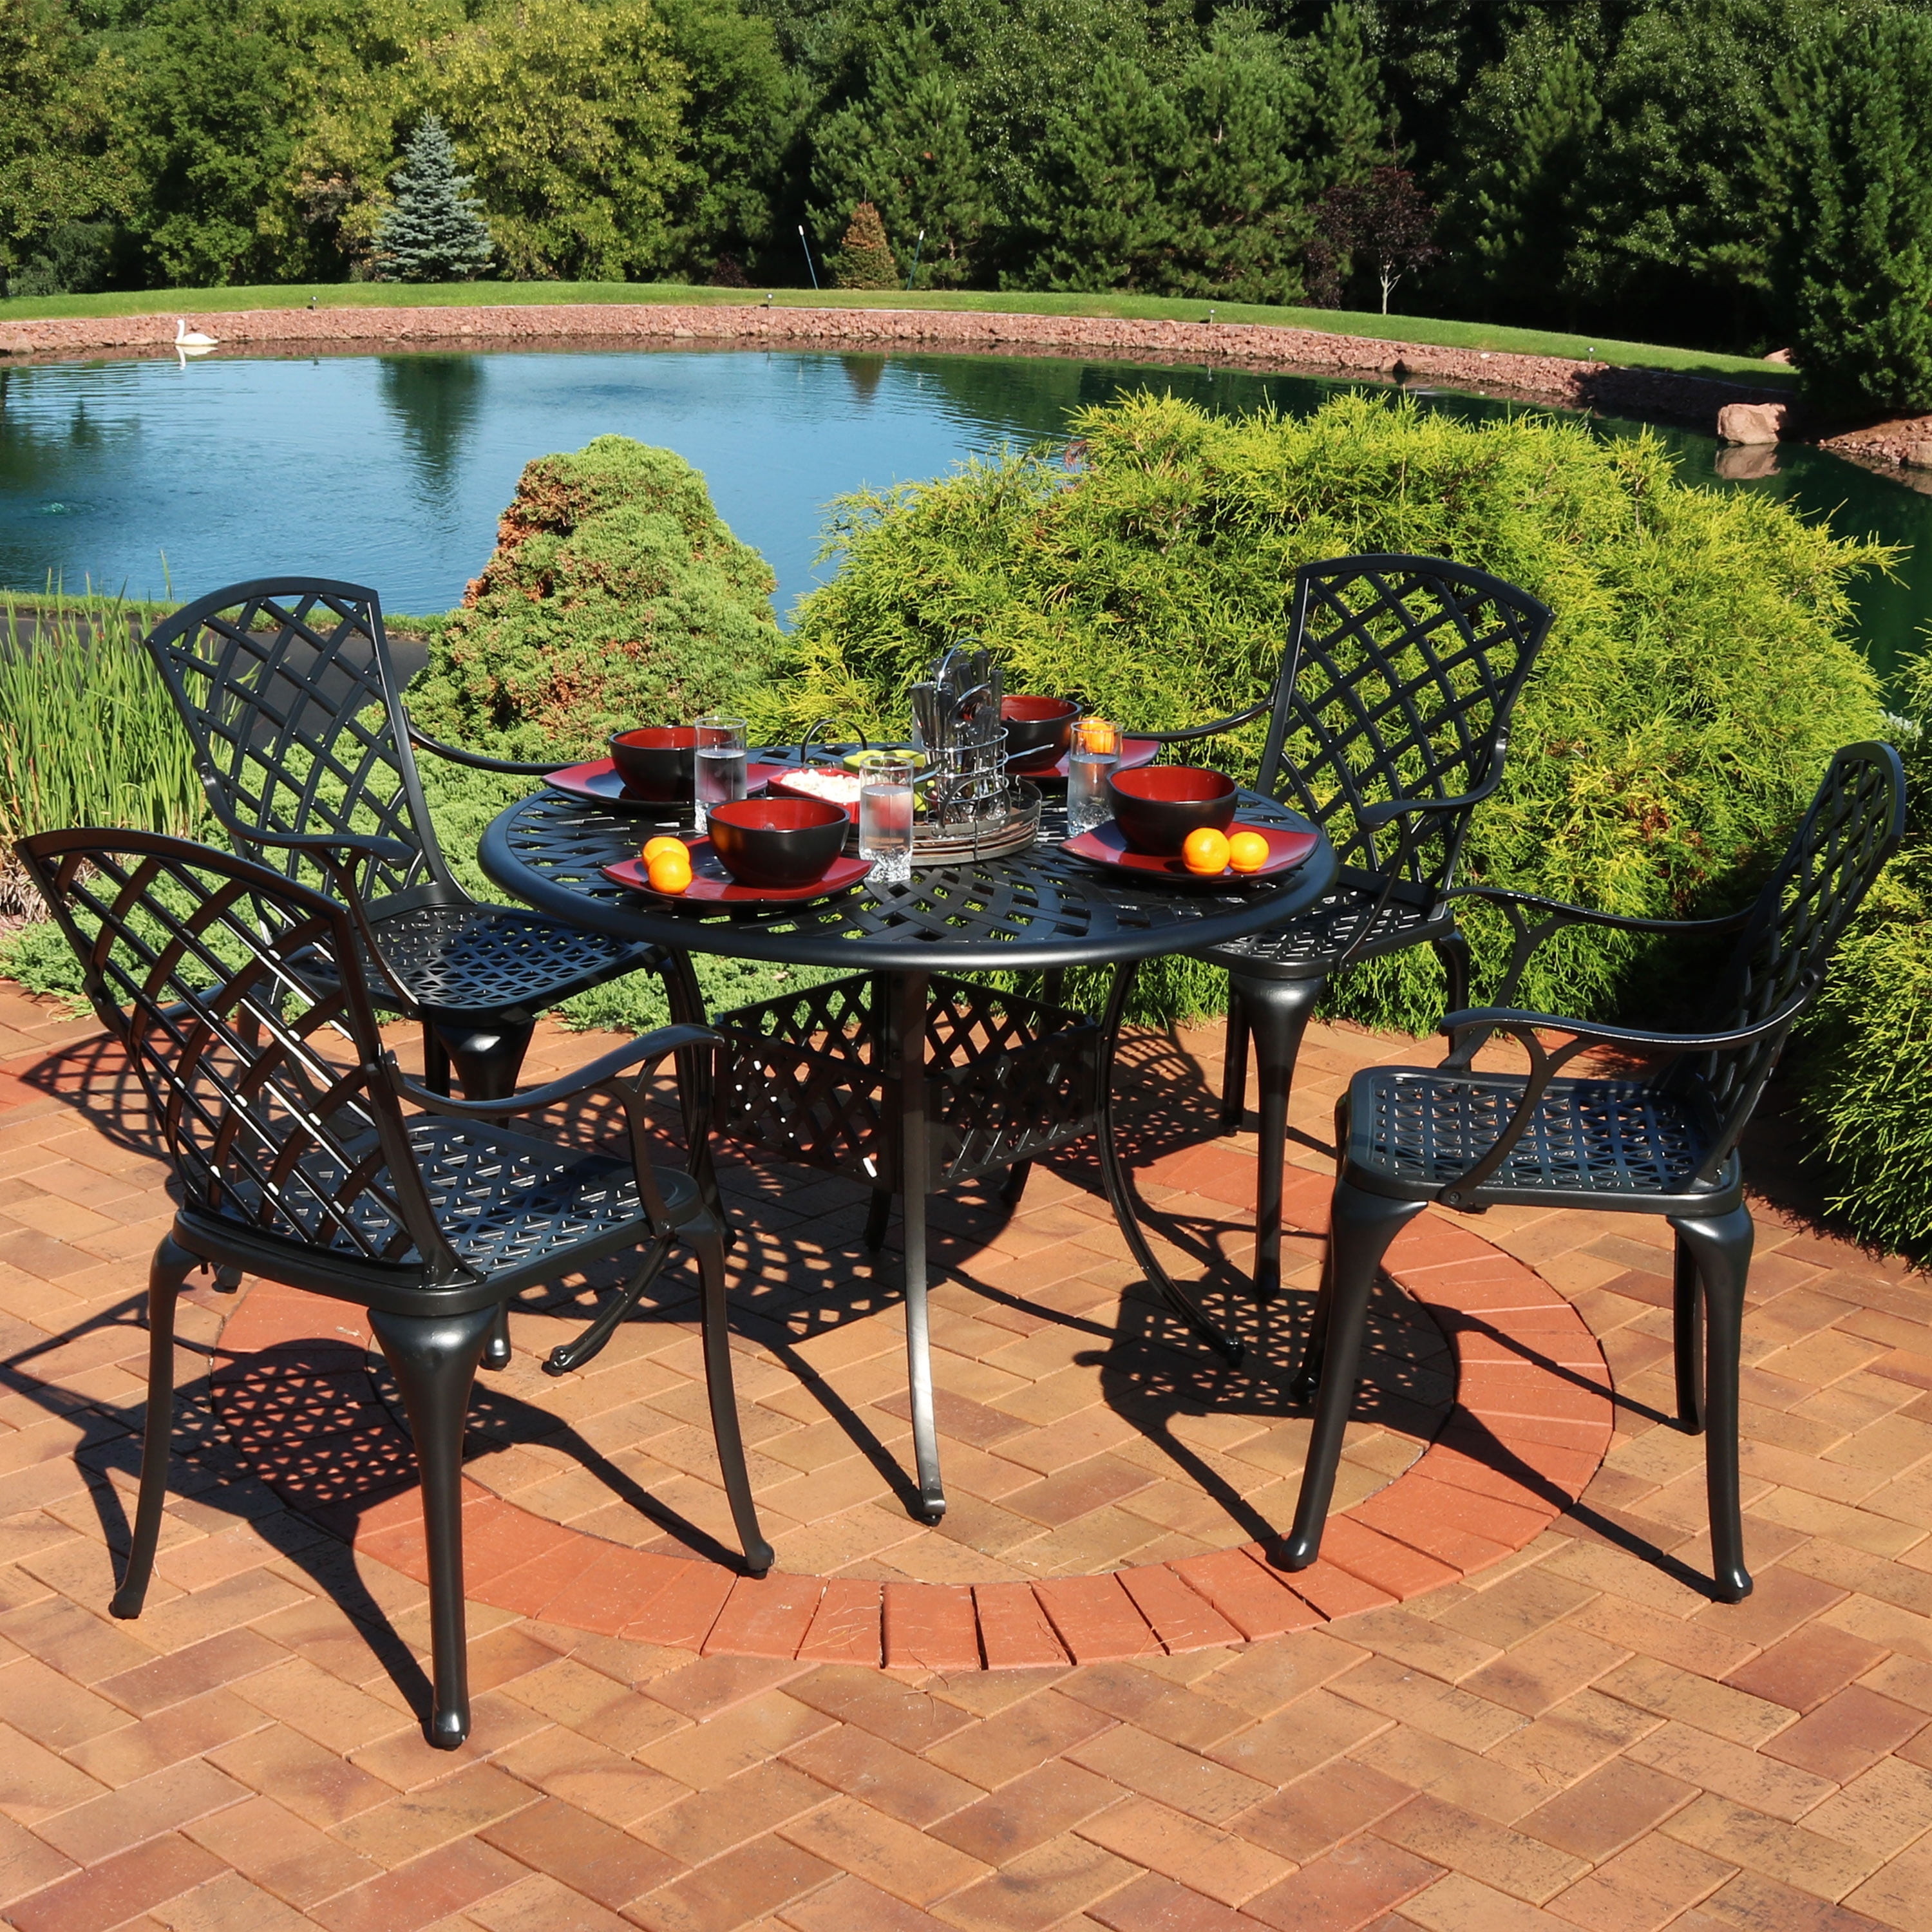 Outdoor Furniture Covers Round Table And Chairs : Patio Covers Chair ...